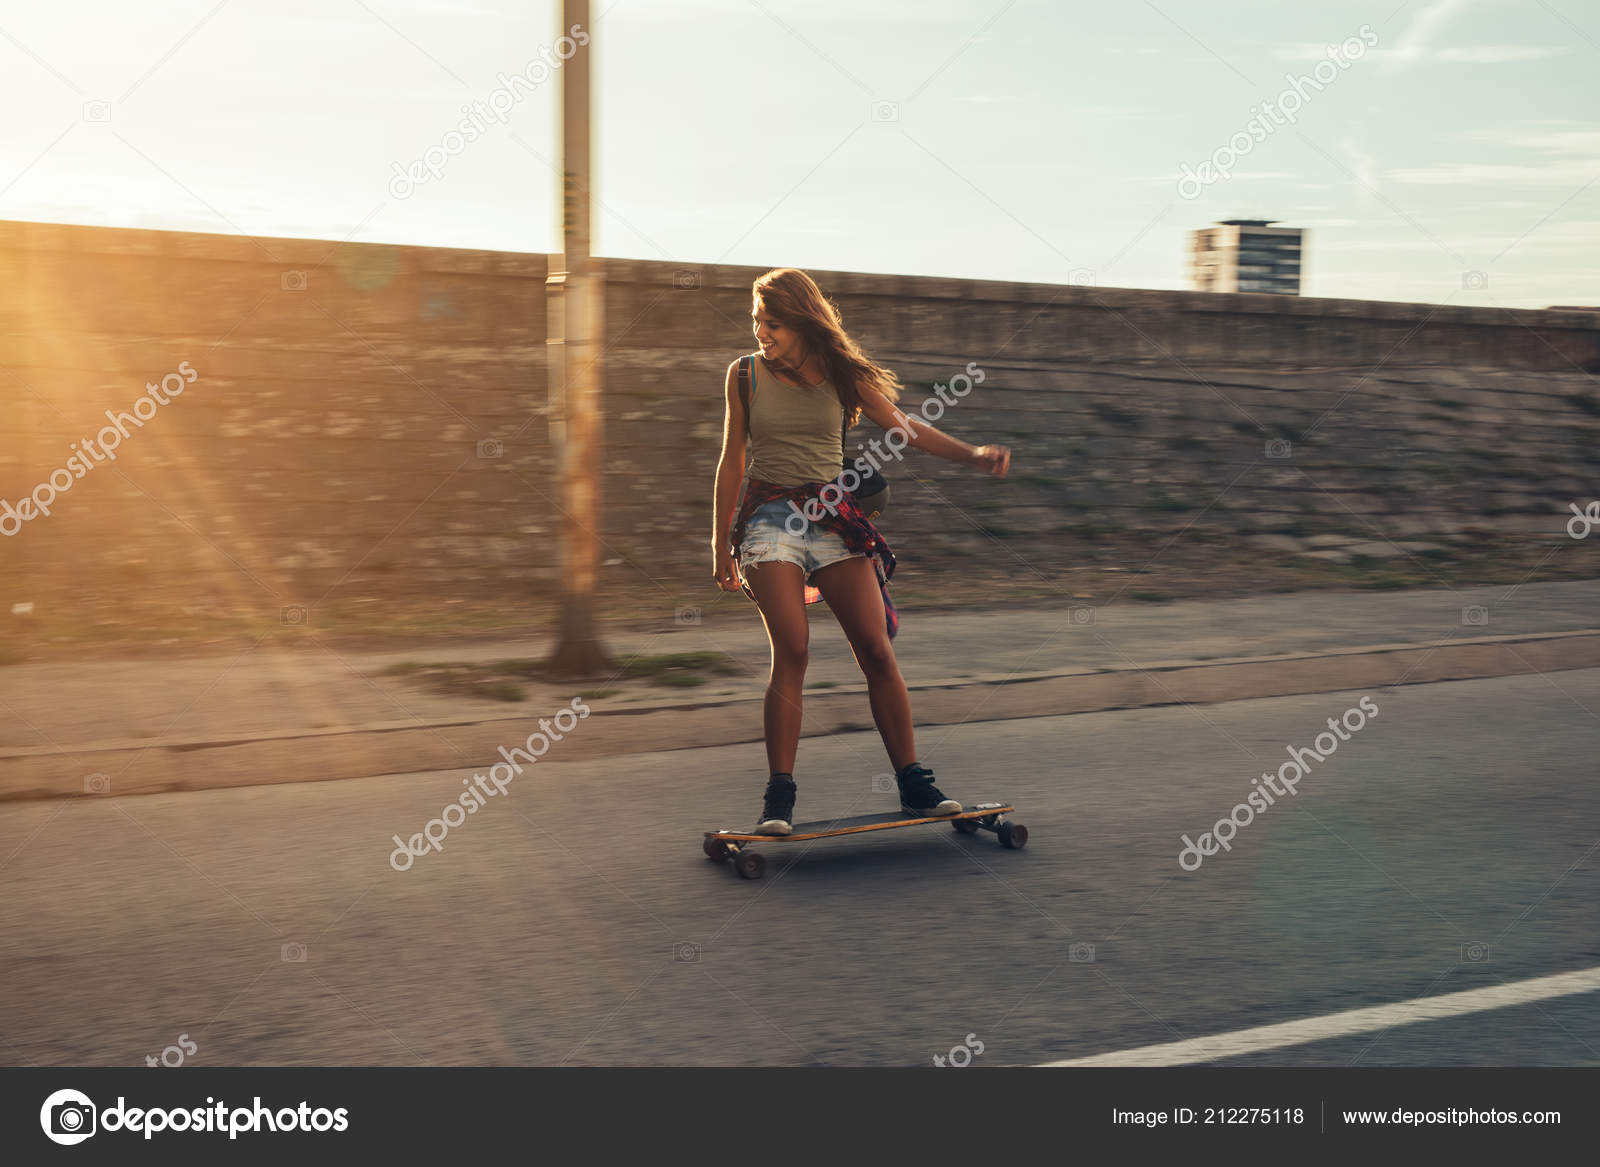 Teenager Driving Stock Photo by 212275118